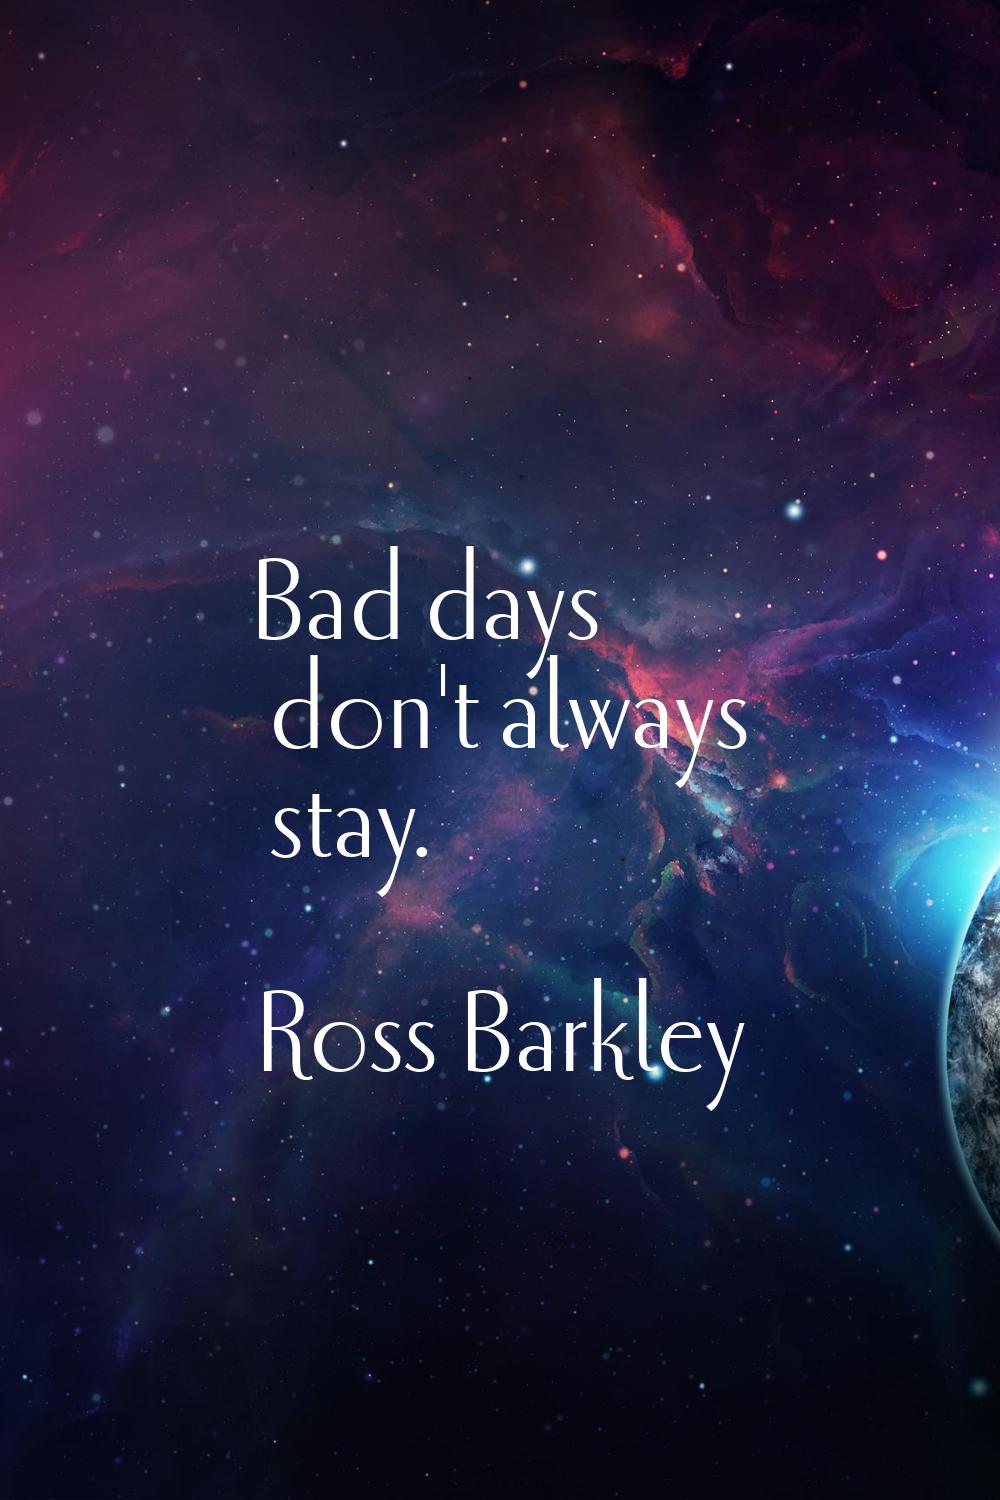 Bad days don't always stay.